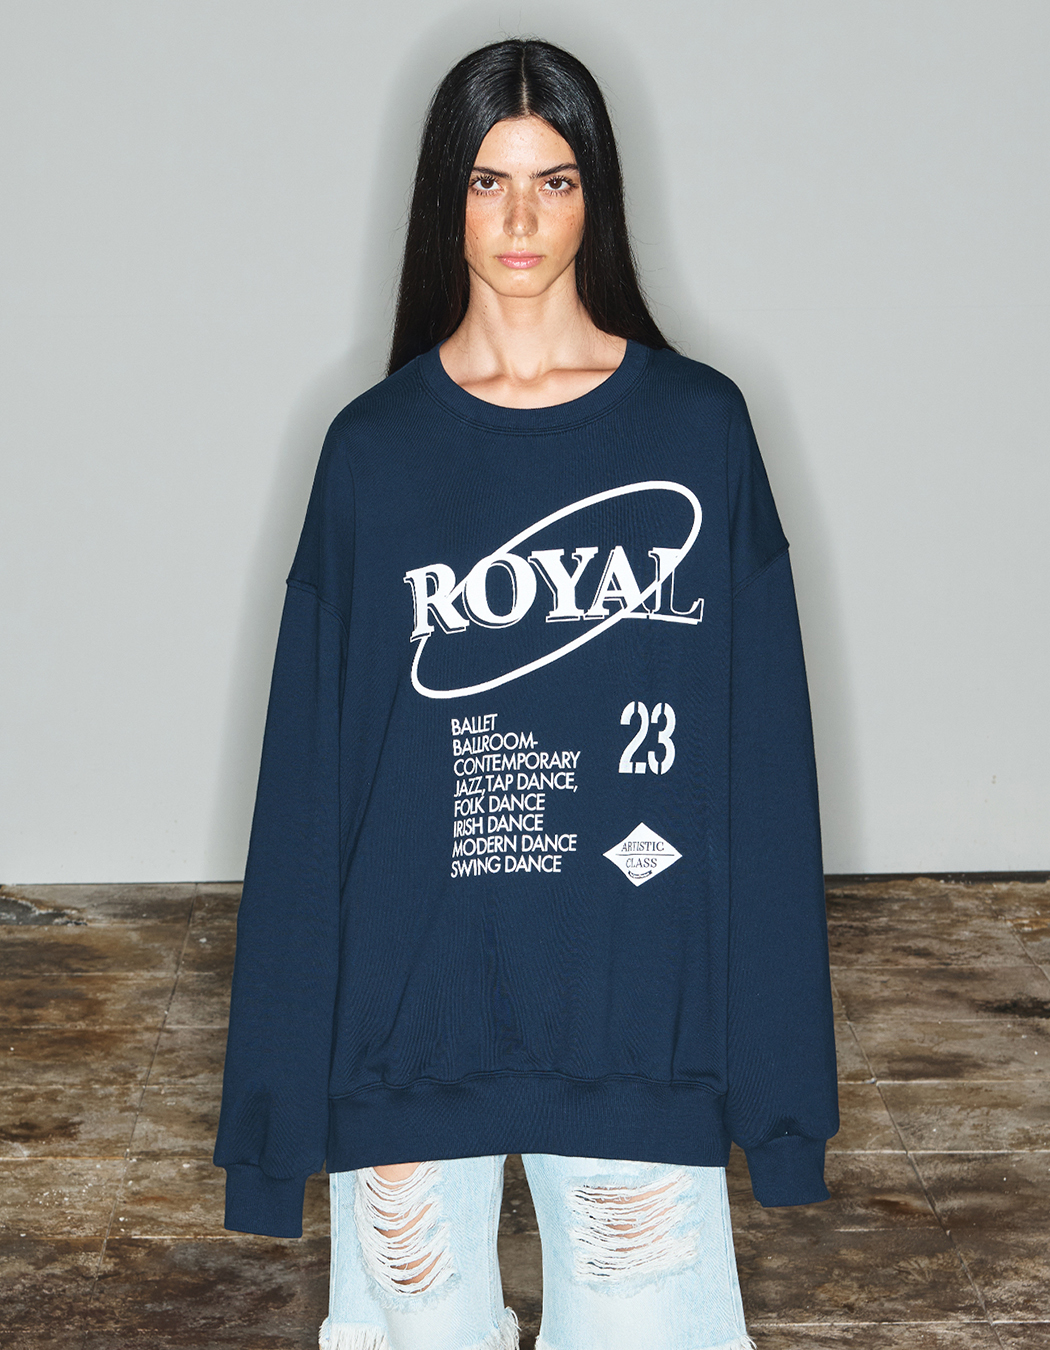 TheOpen Product】☆ROYAL LETTER SWEATSHIR.T☆スウェット 販売促進物